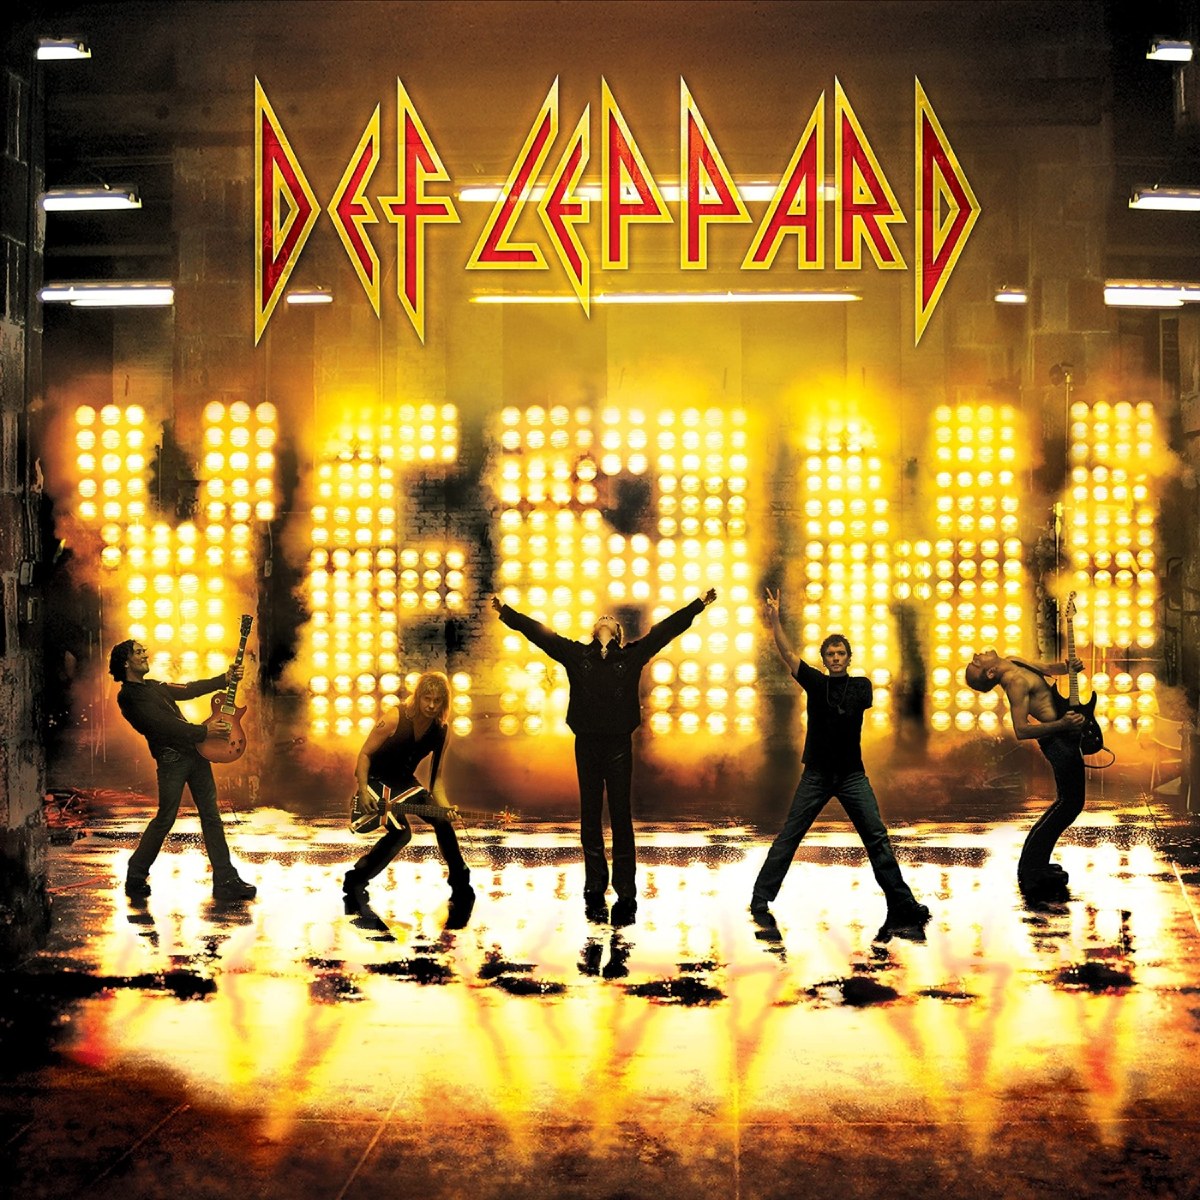 Cover of the "Yeah!" album by Def Leppard